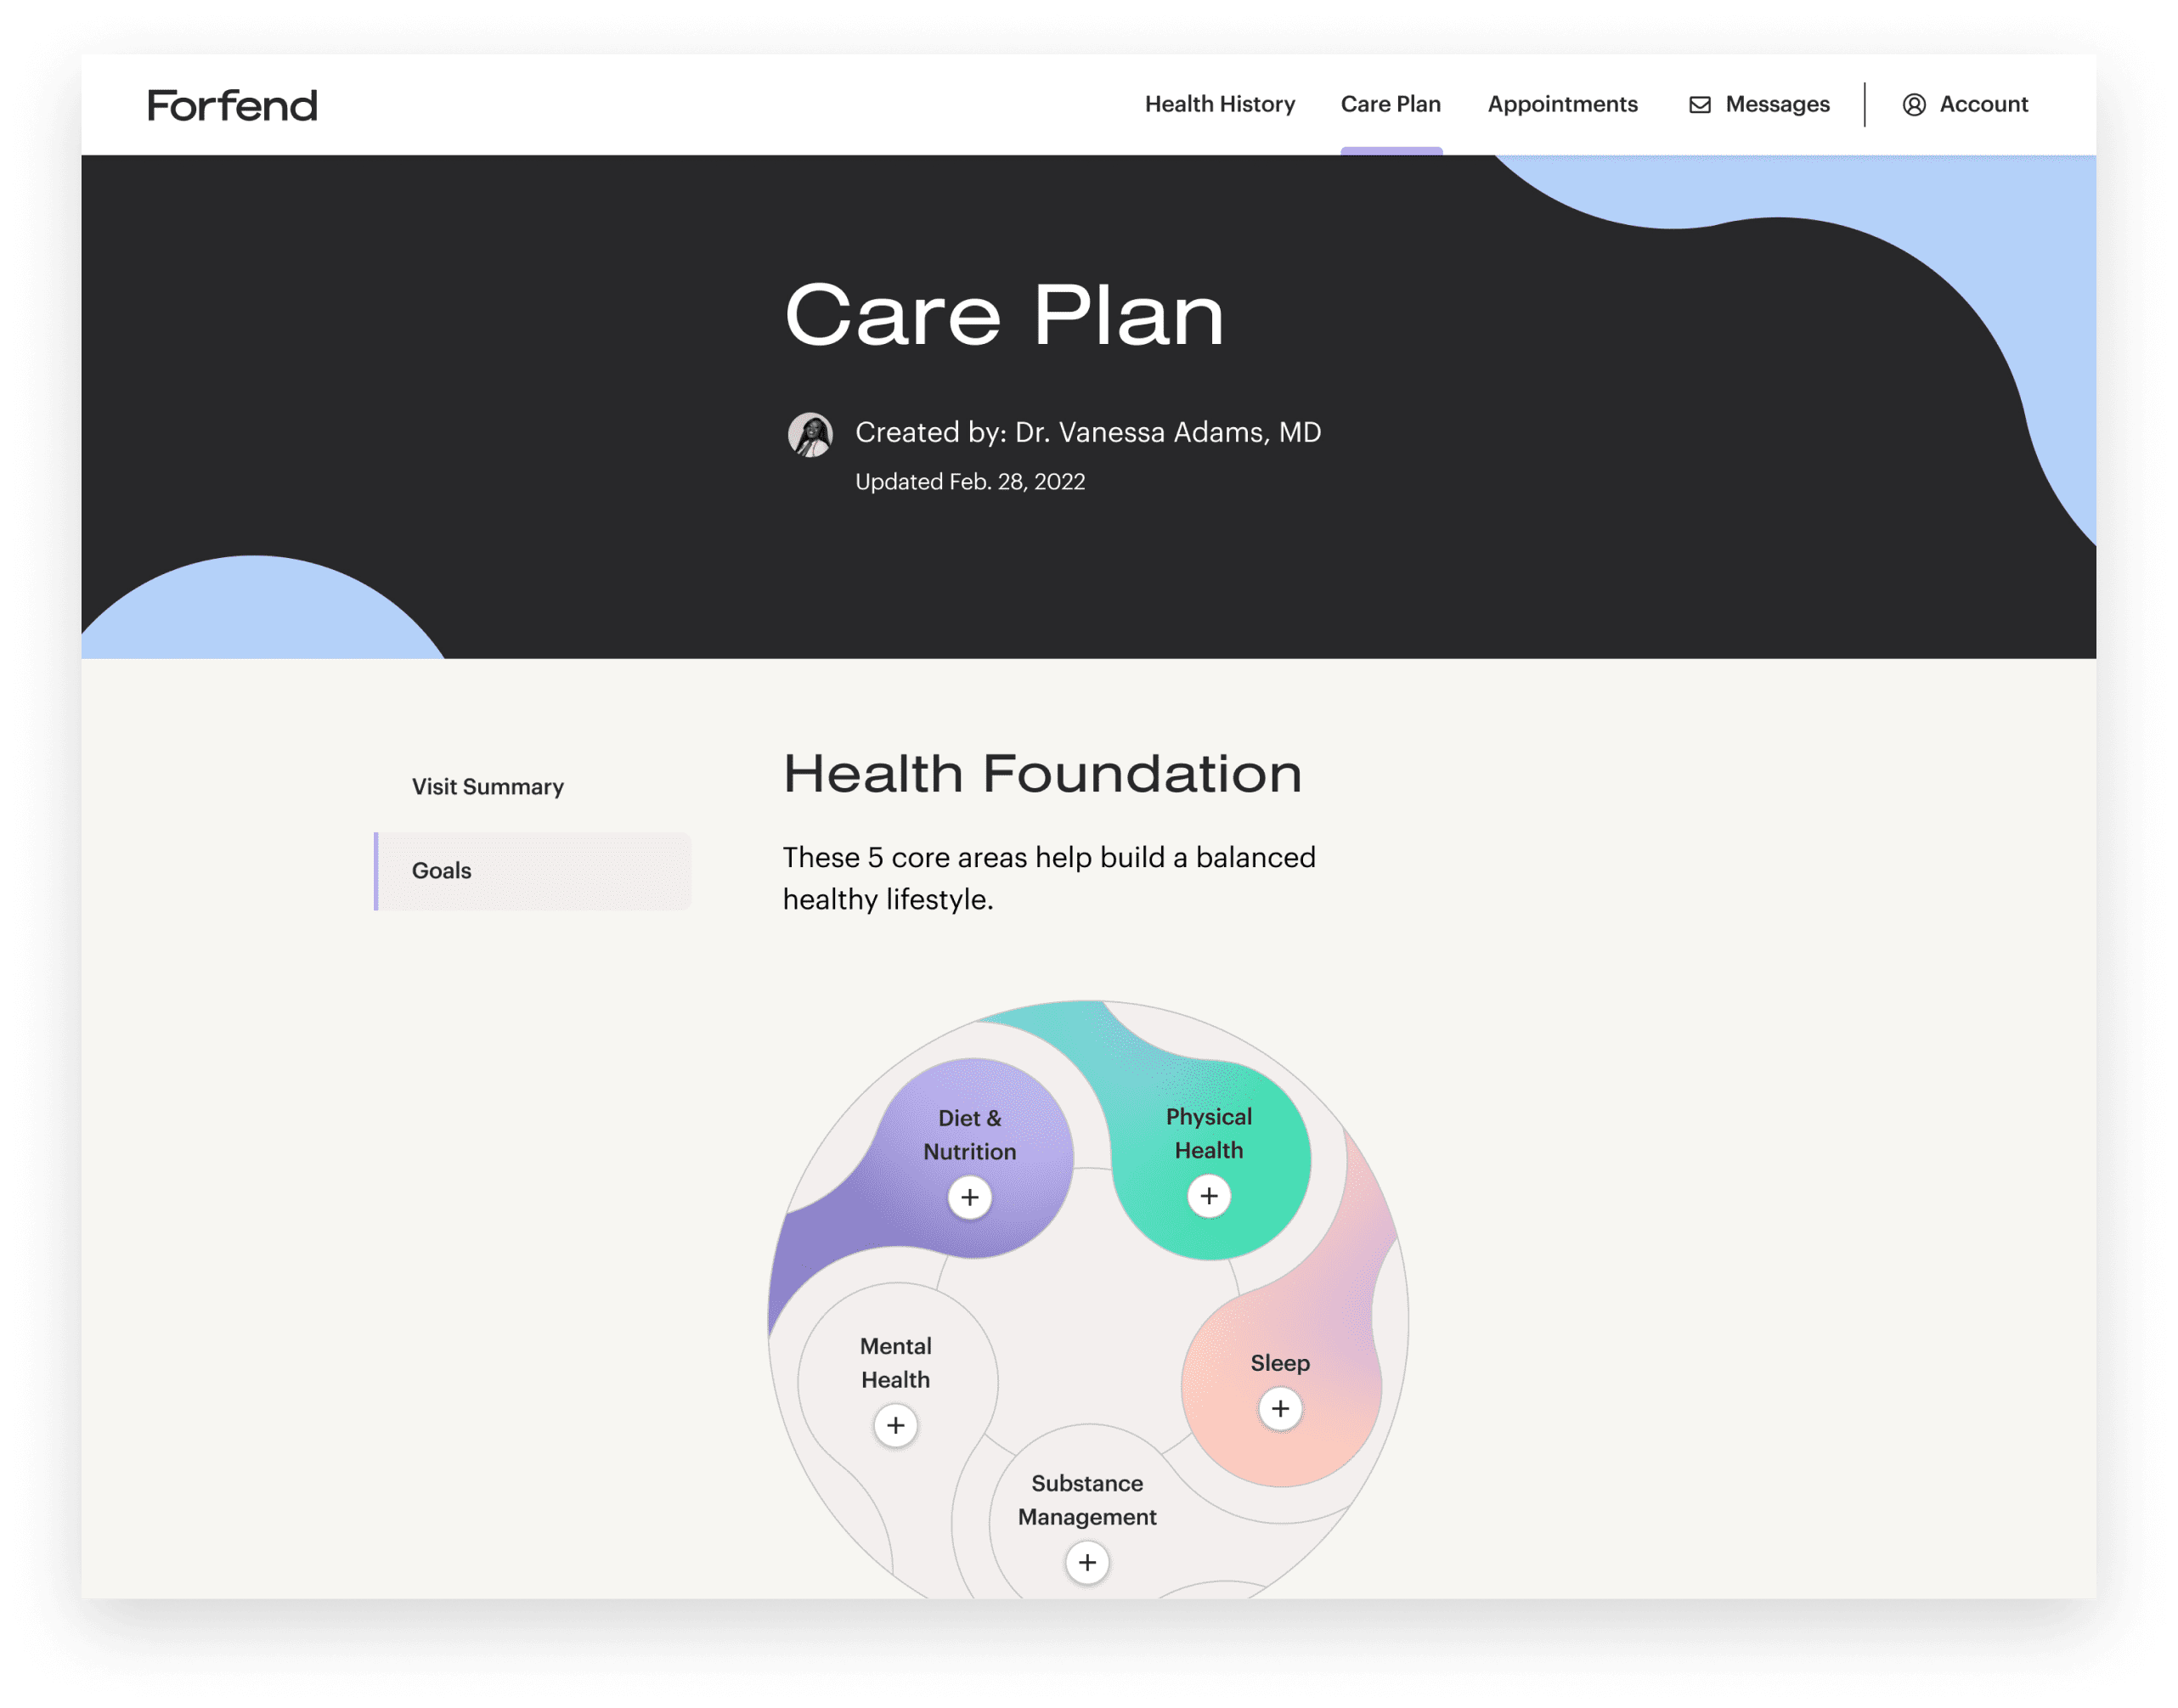 After completing the quiz the patient receives a personalized care plan.